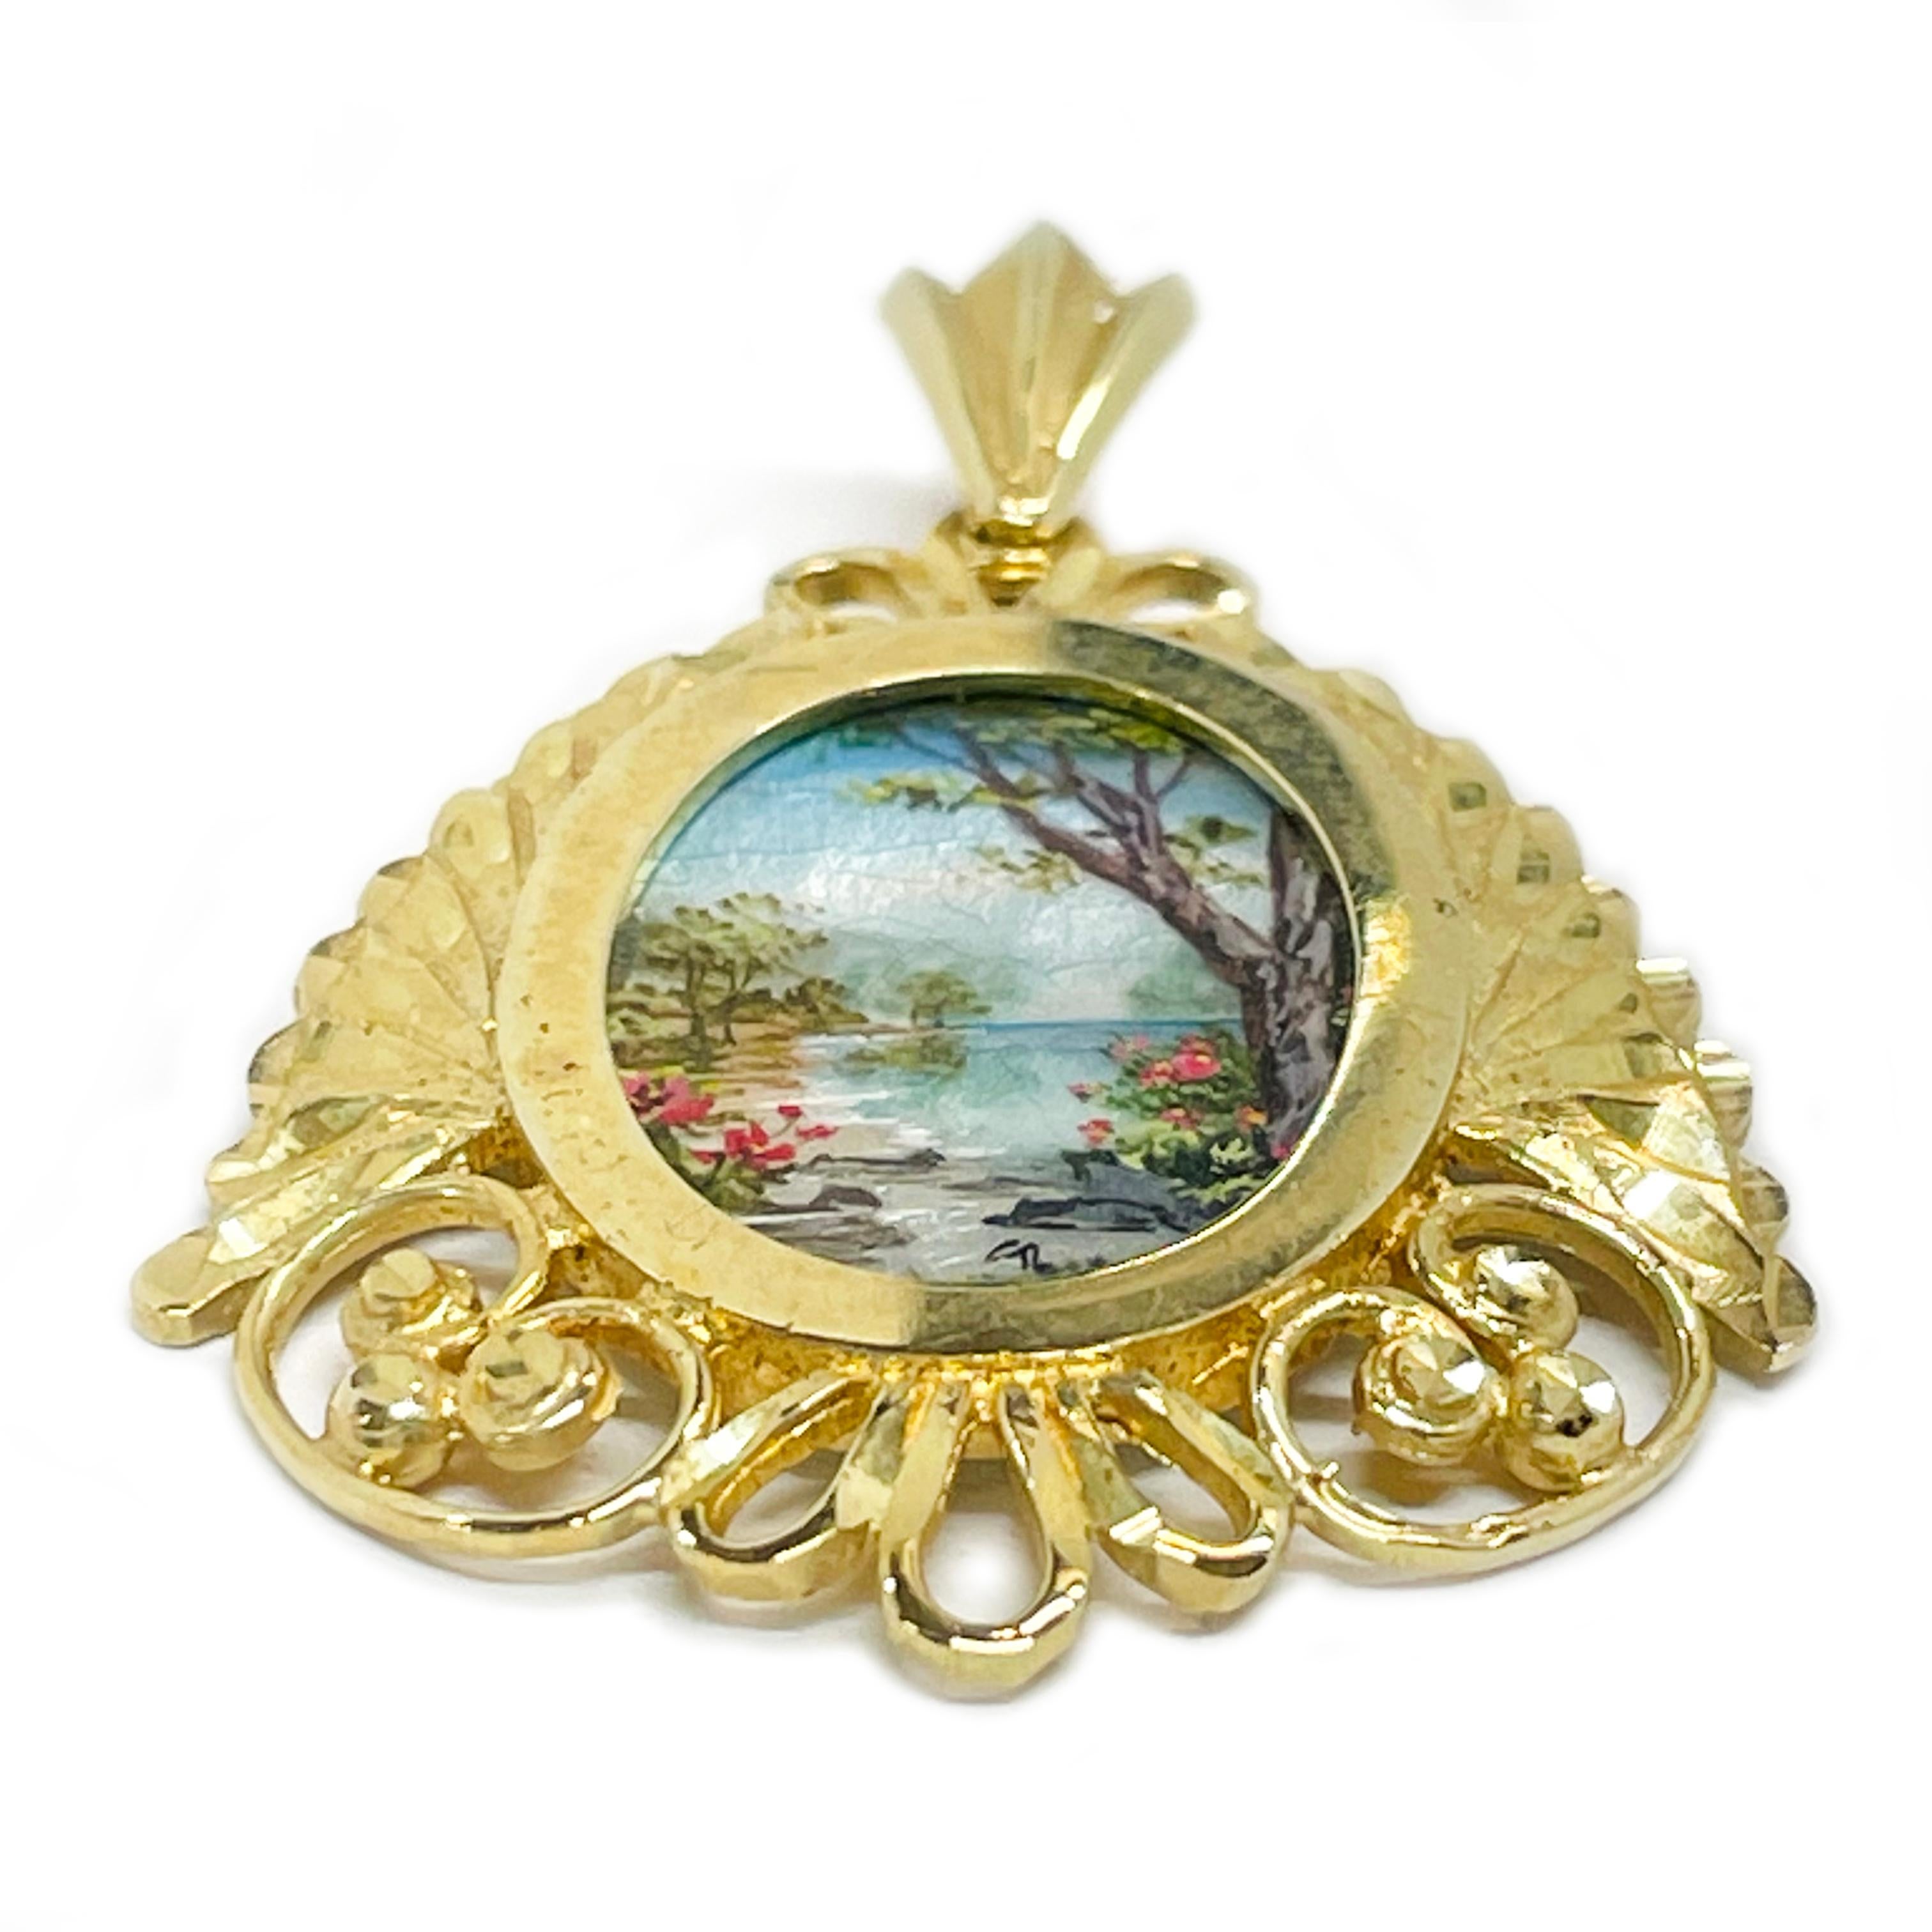 14 Karat Yellow Gold Hand Painted Ocean Scene on Mother of Pearl Pendant. Absolutely lovely ocean scene with tree in the foreground painting. The miniature painting is set in a 14 karat gold ornate oval frame with diamond-cut details. The painting